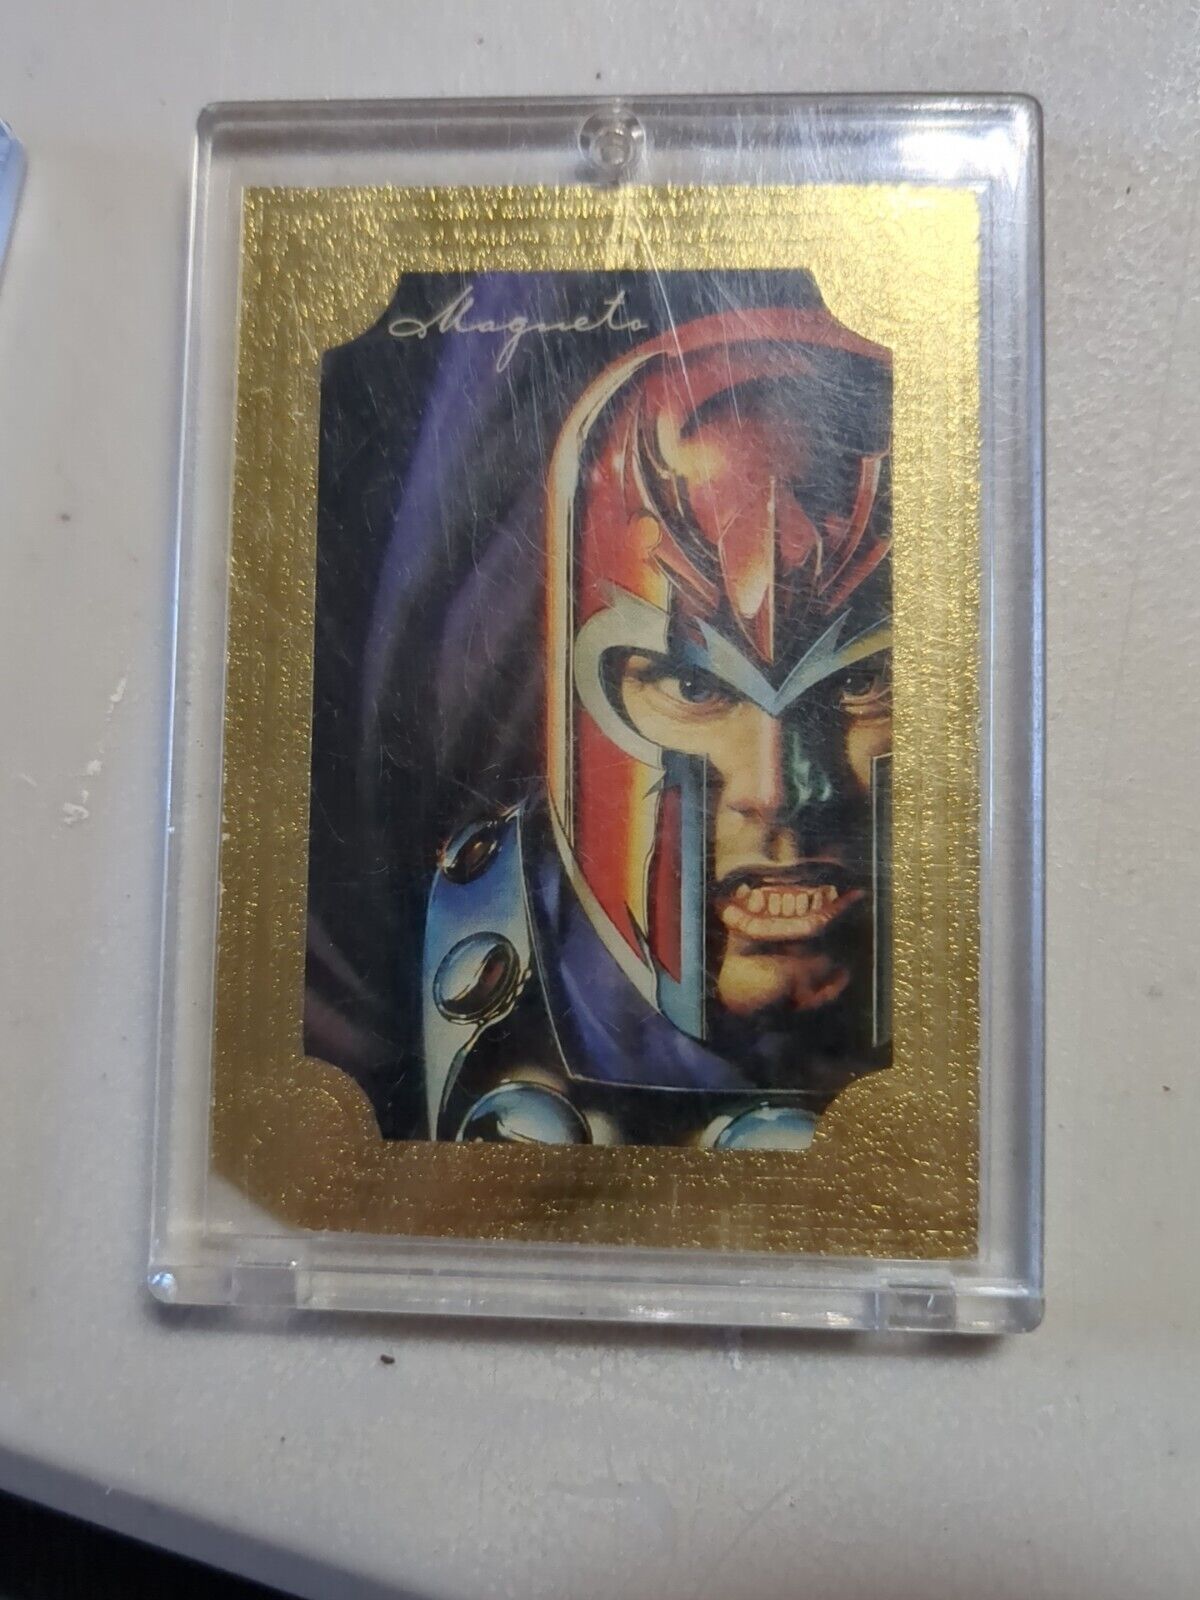 1996 Marvel Masterpieces Magneto Gold Gallery #3 of 6 Die Cut Promo Card Rare